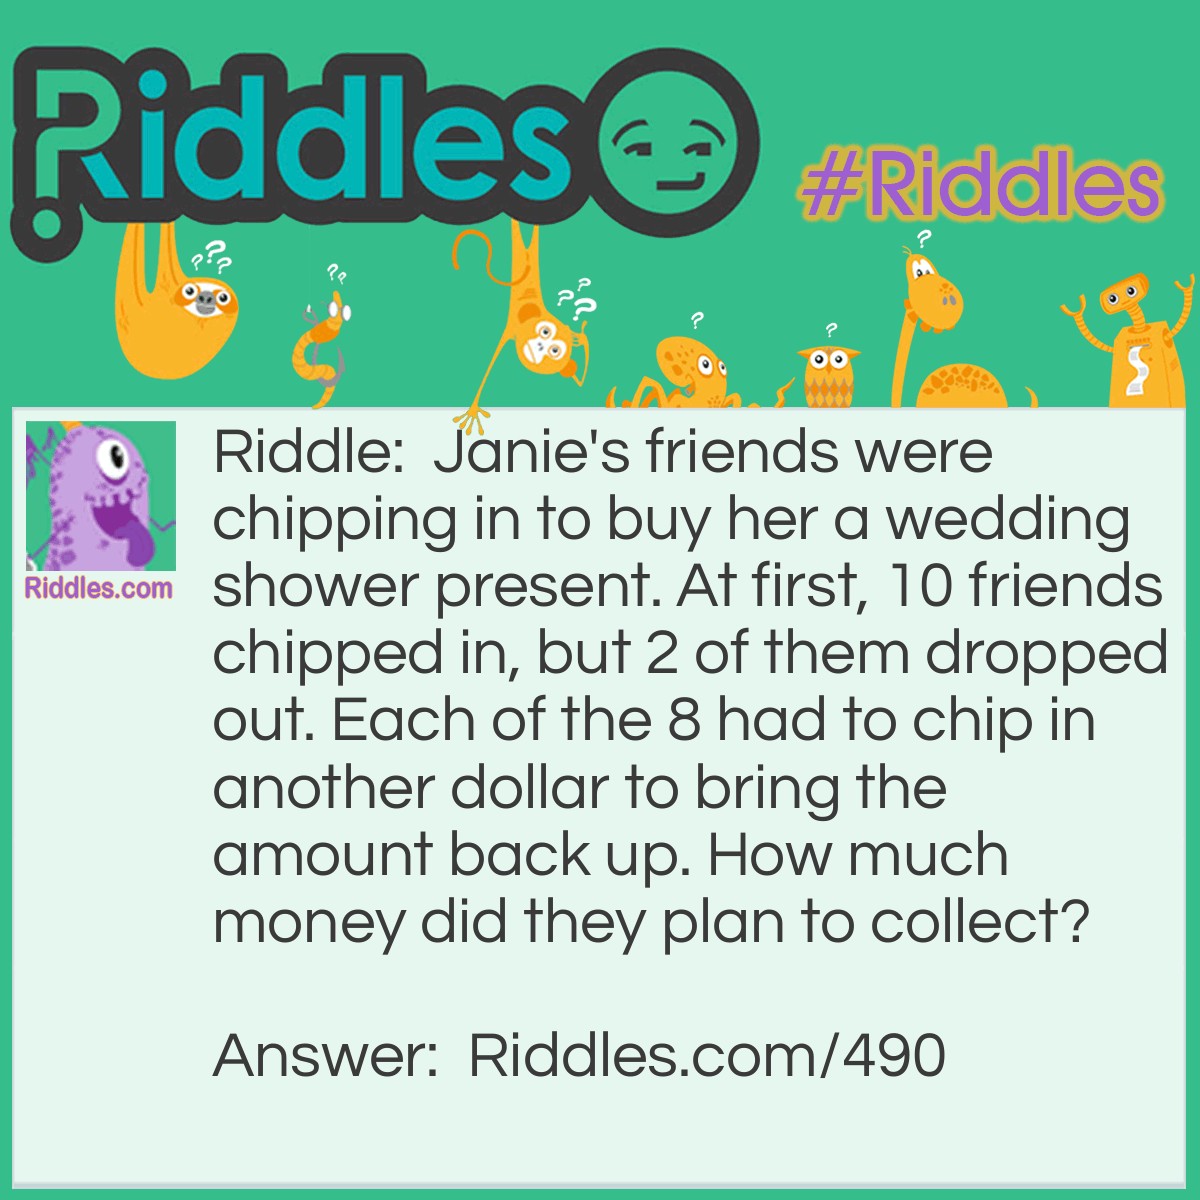 Riddle: Janie's friends were chipping in to buy her a wedding shower present. At first, 10 friends chipped in, but 2 of them dropped out. Each of the 8 had to chip in another dollar to bring the amount back up. How much money did they plan to collect? Answer: $40 (10 at $4, or 8 at $5).